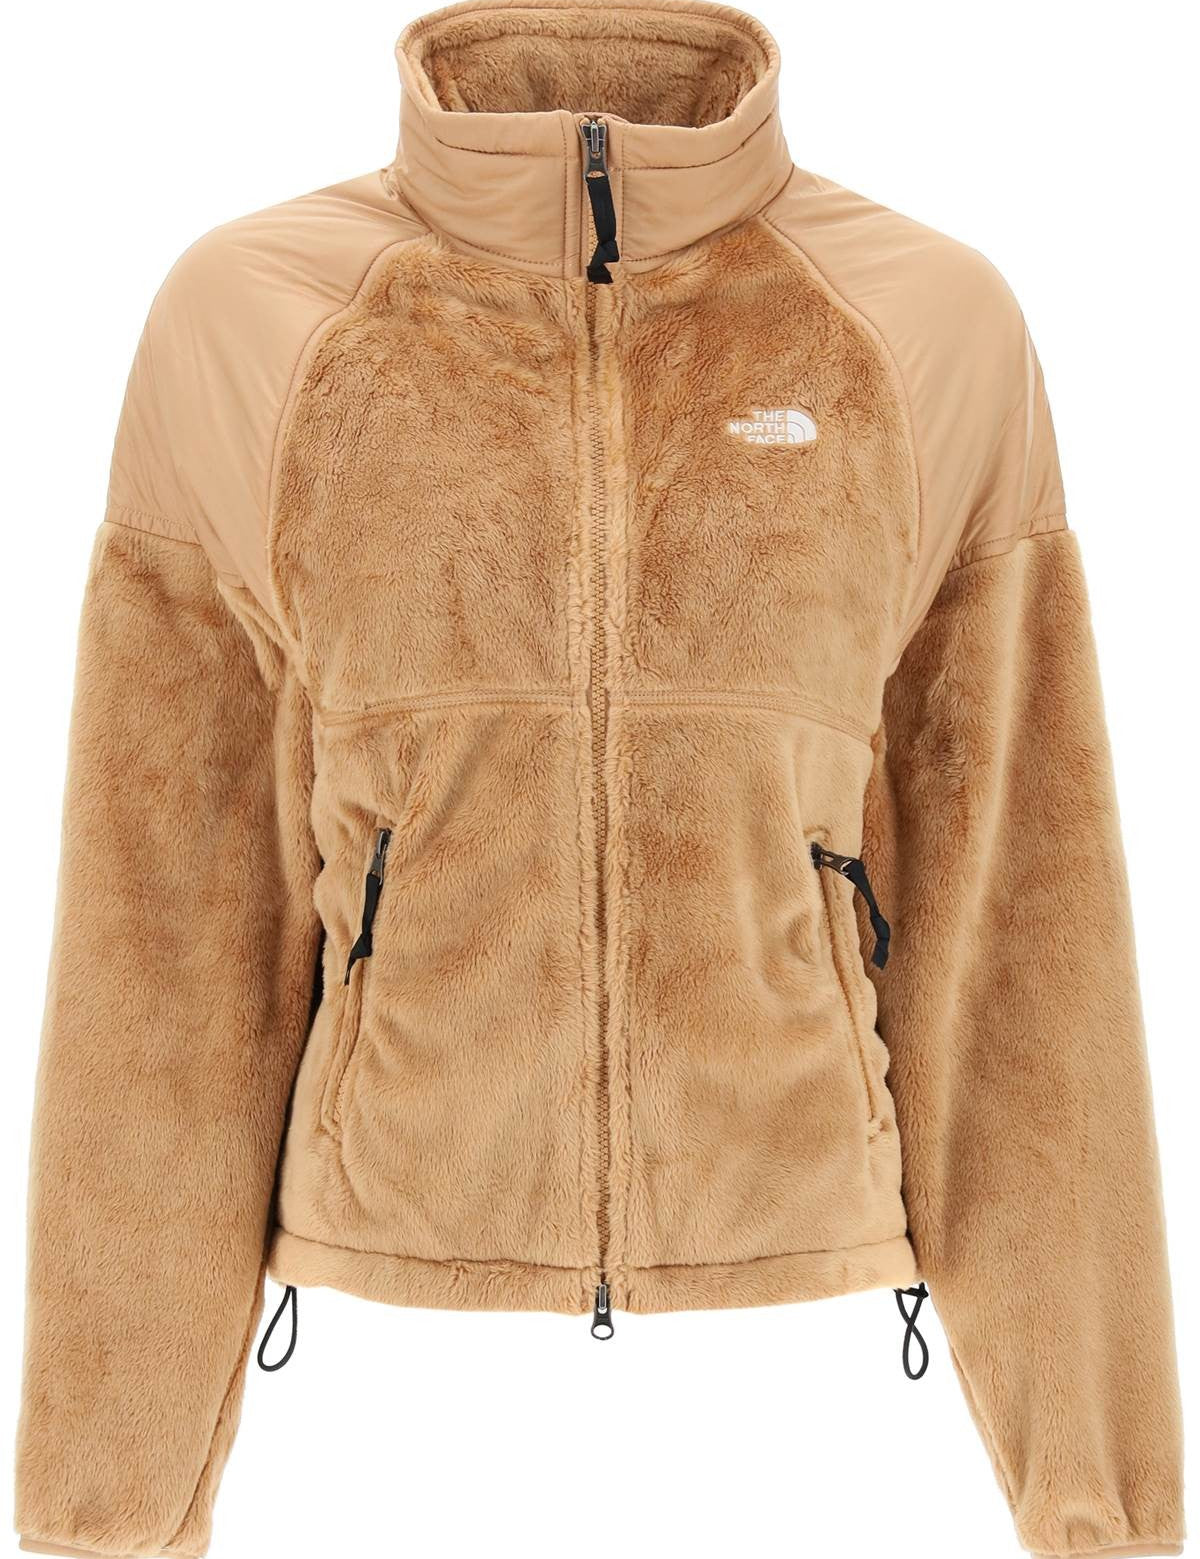 the-north-face-versa-velour-jacket-in-recycled-fleece-and-ripstop.jpg